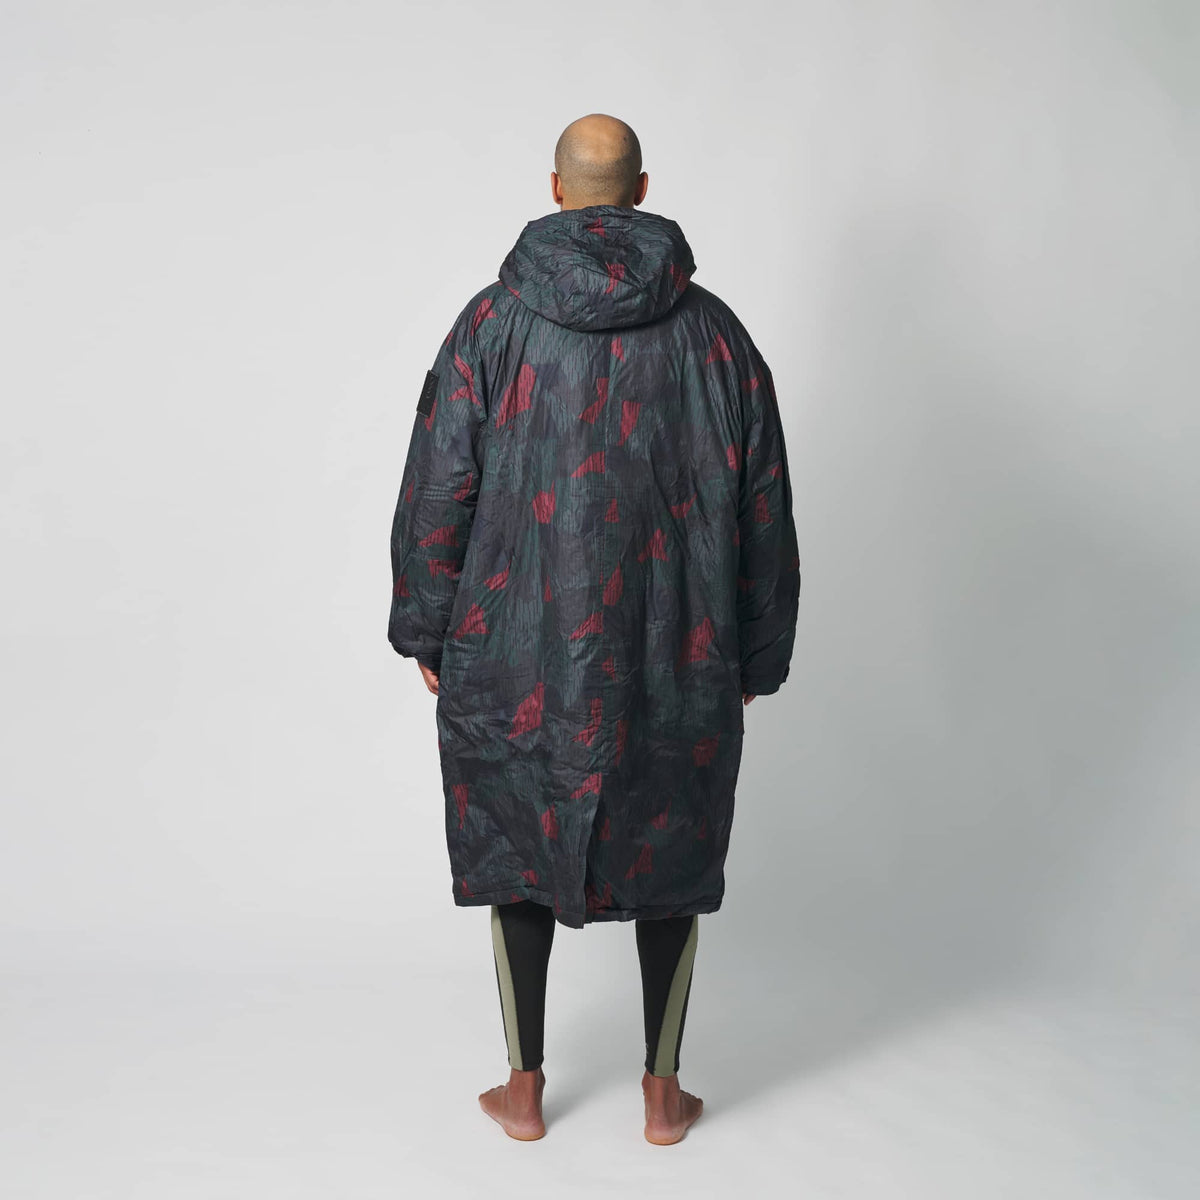 VOITED Outdoor Change Robe & Drycoat for Surfing, Camping, Vanlife & Wild Swimming - Moment Camo